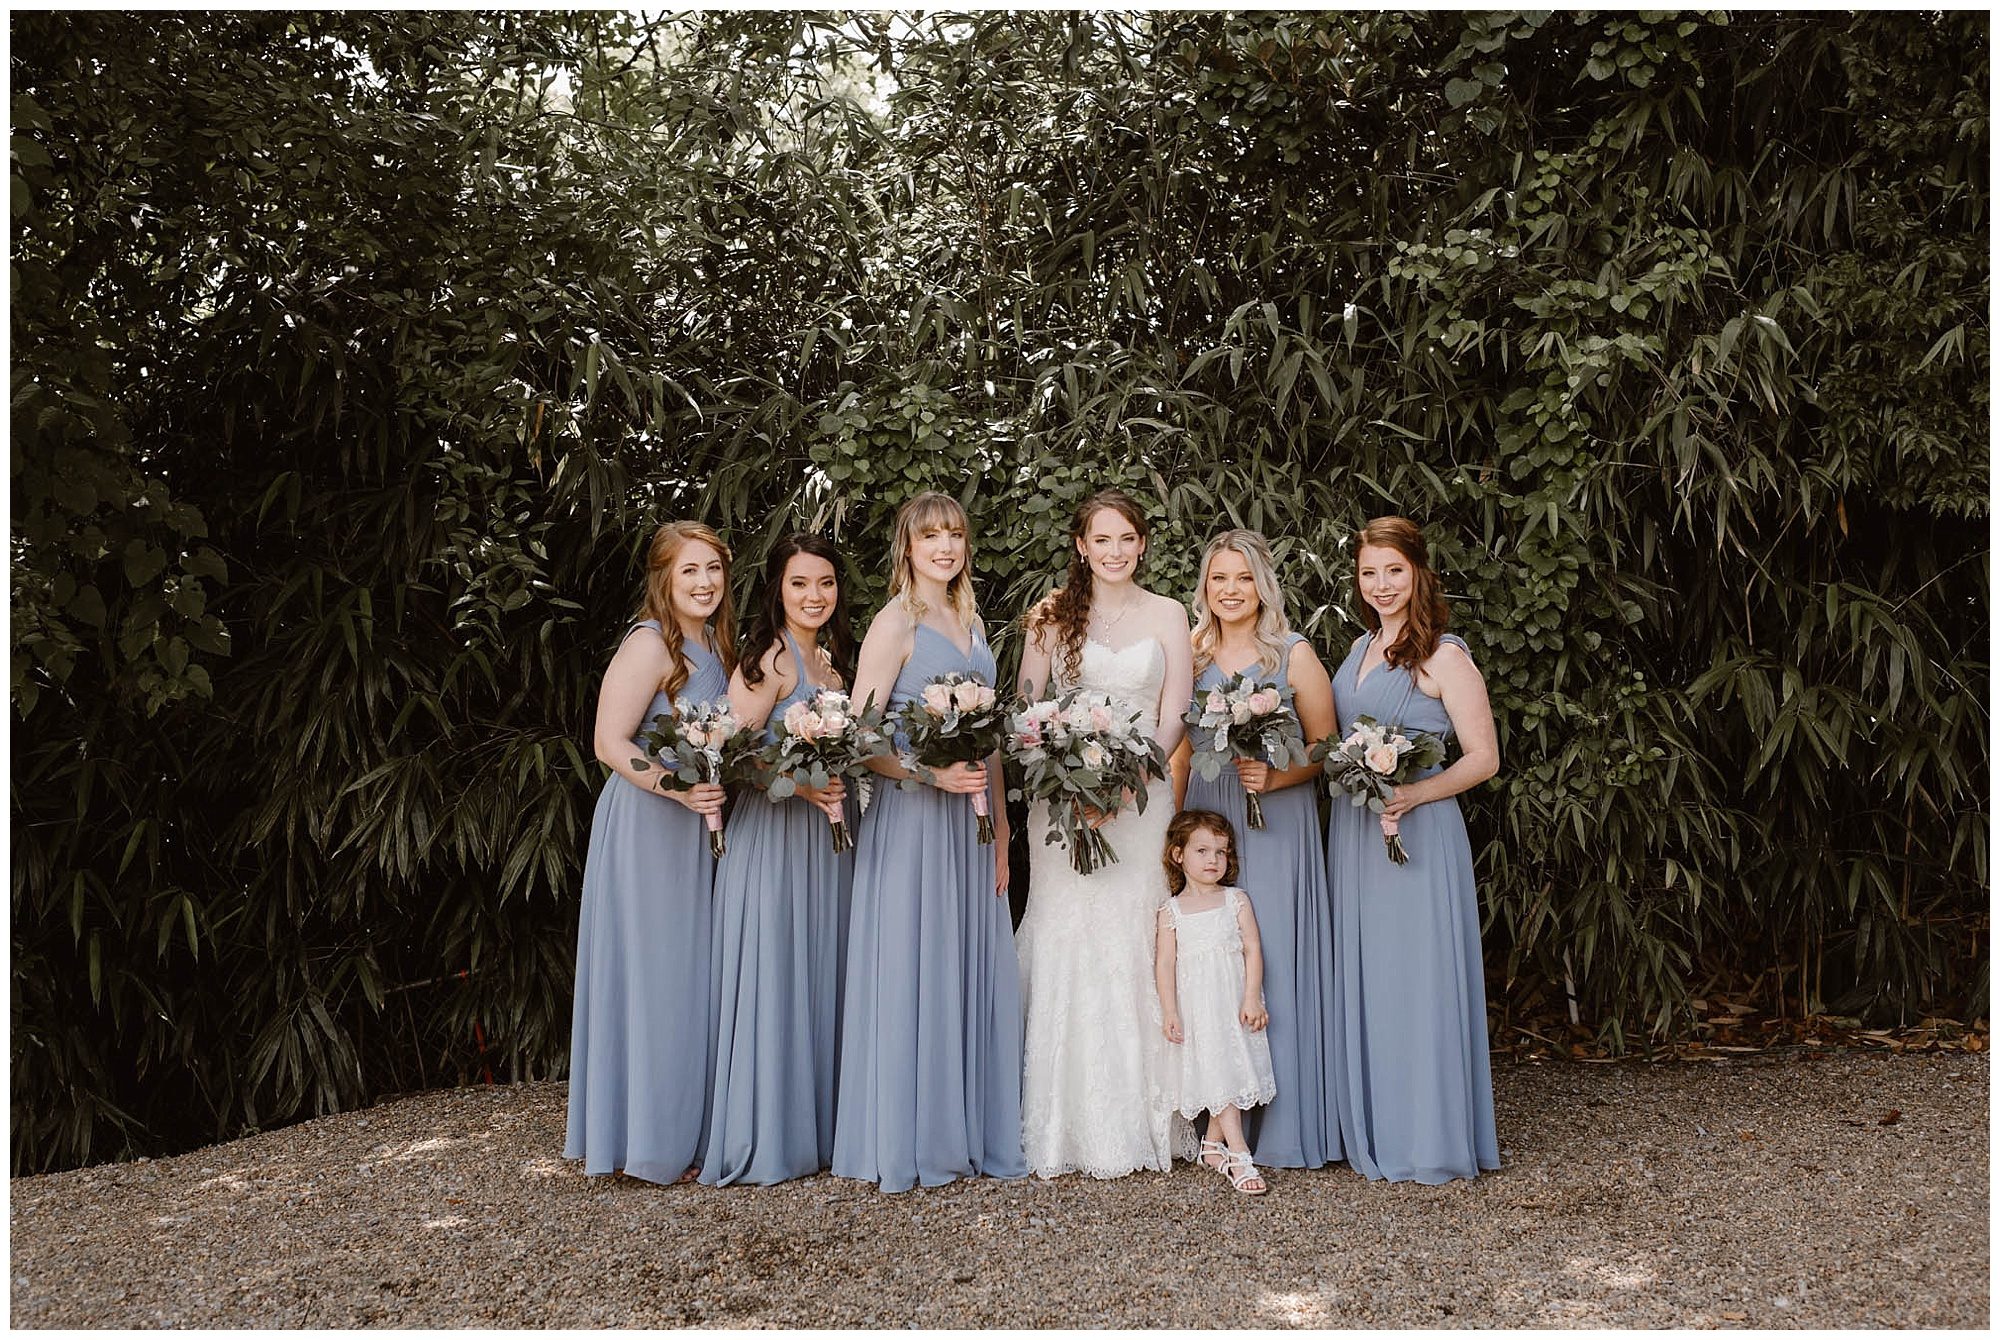 Bridesmaid Photos at Crescent Bend House Knoxville